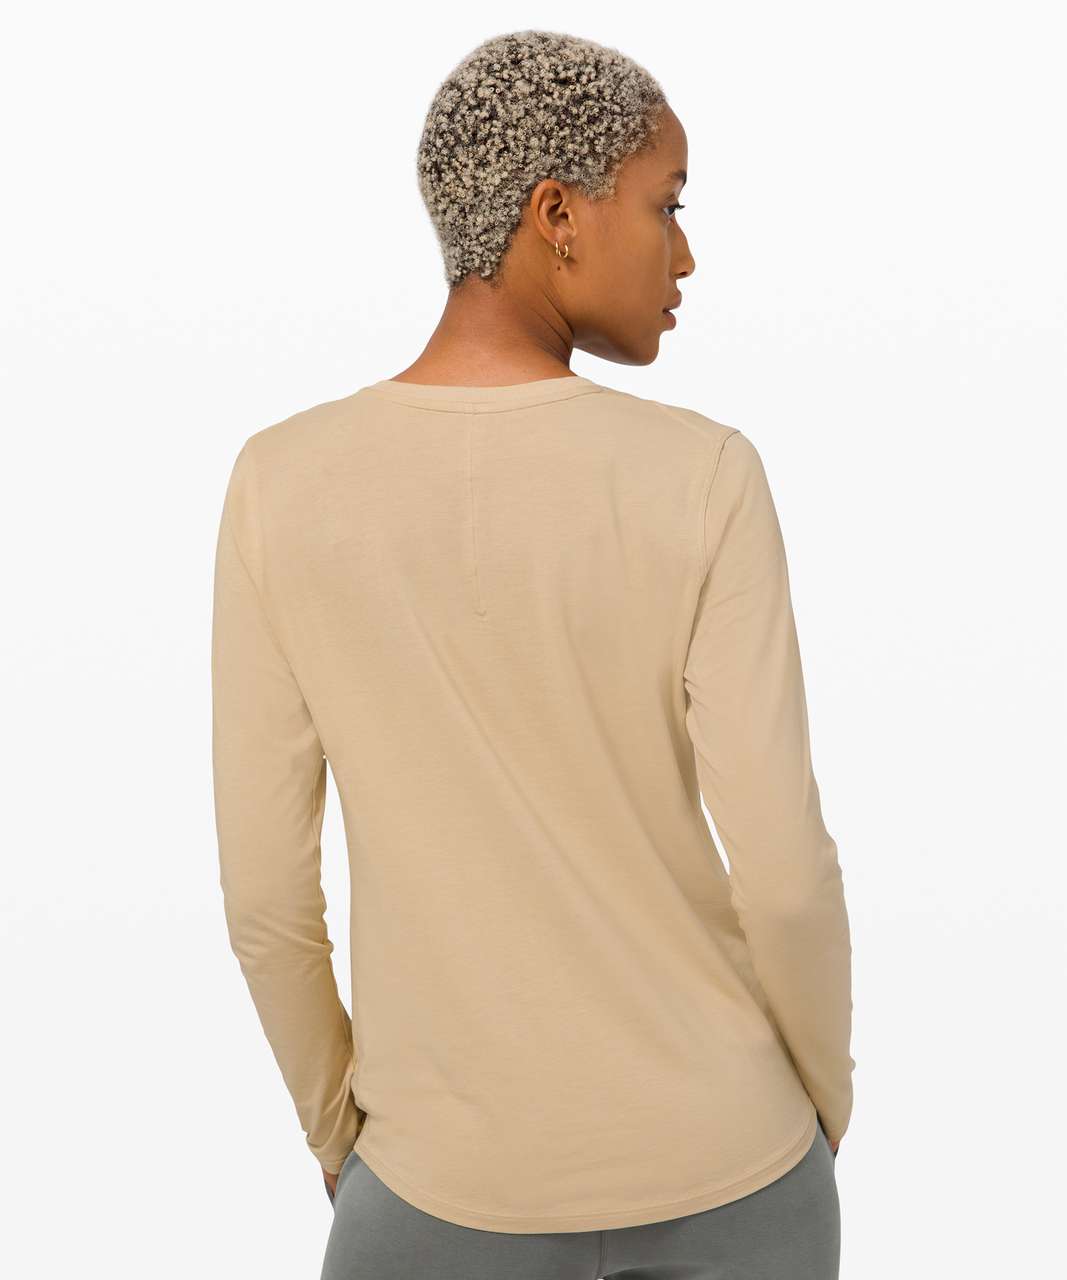 Lululemon Ever Ready Long Sleeve Size 10 Willow Green WLWG 02194 